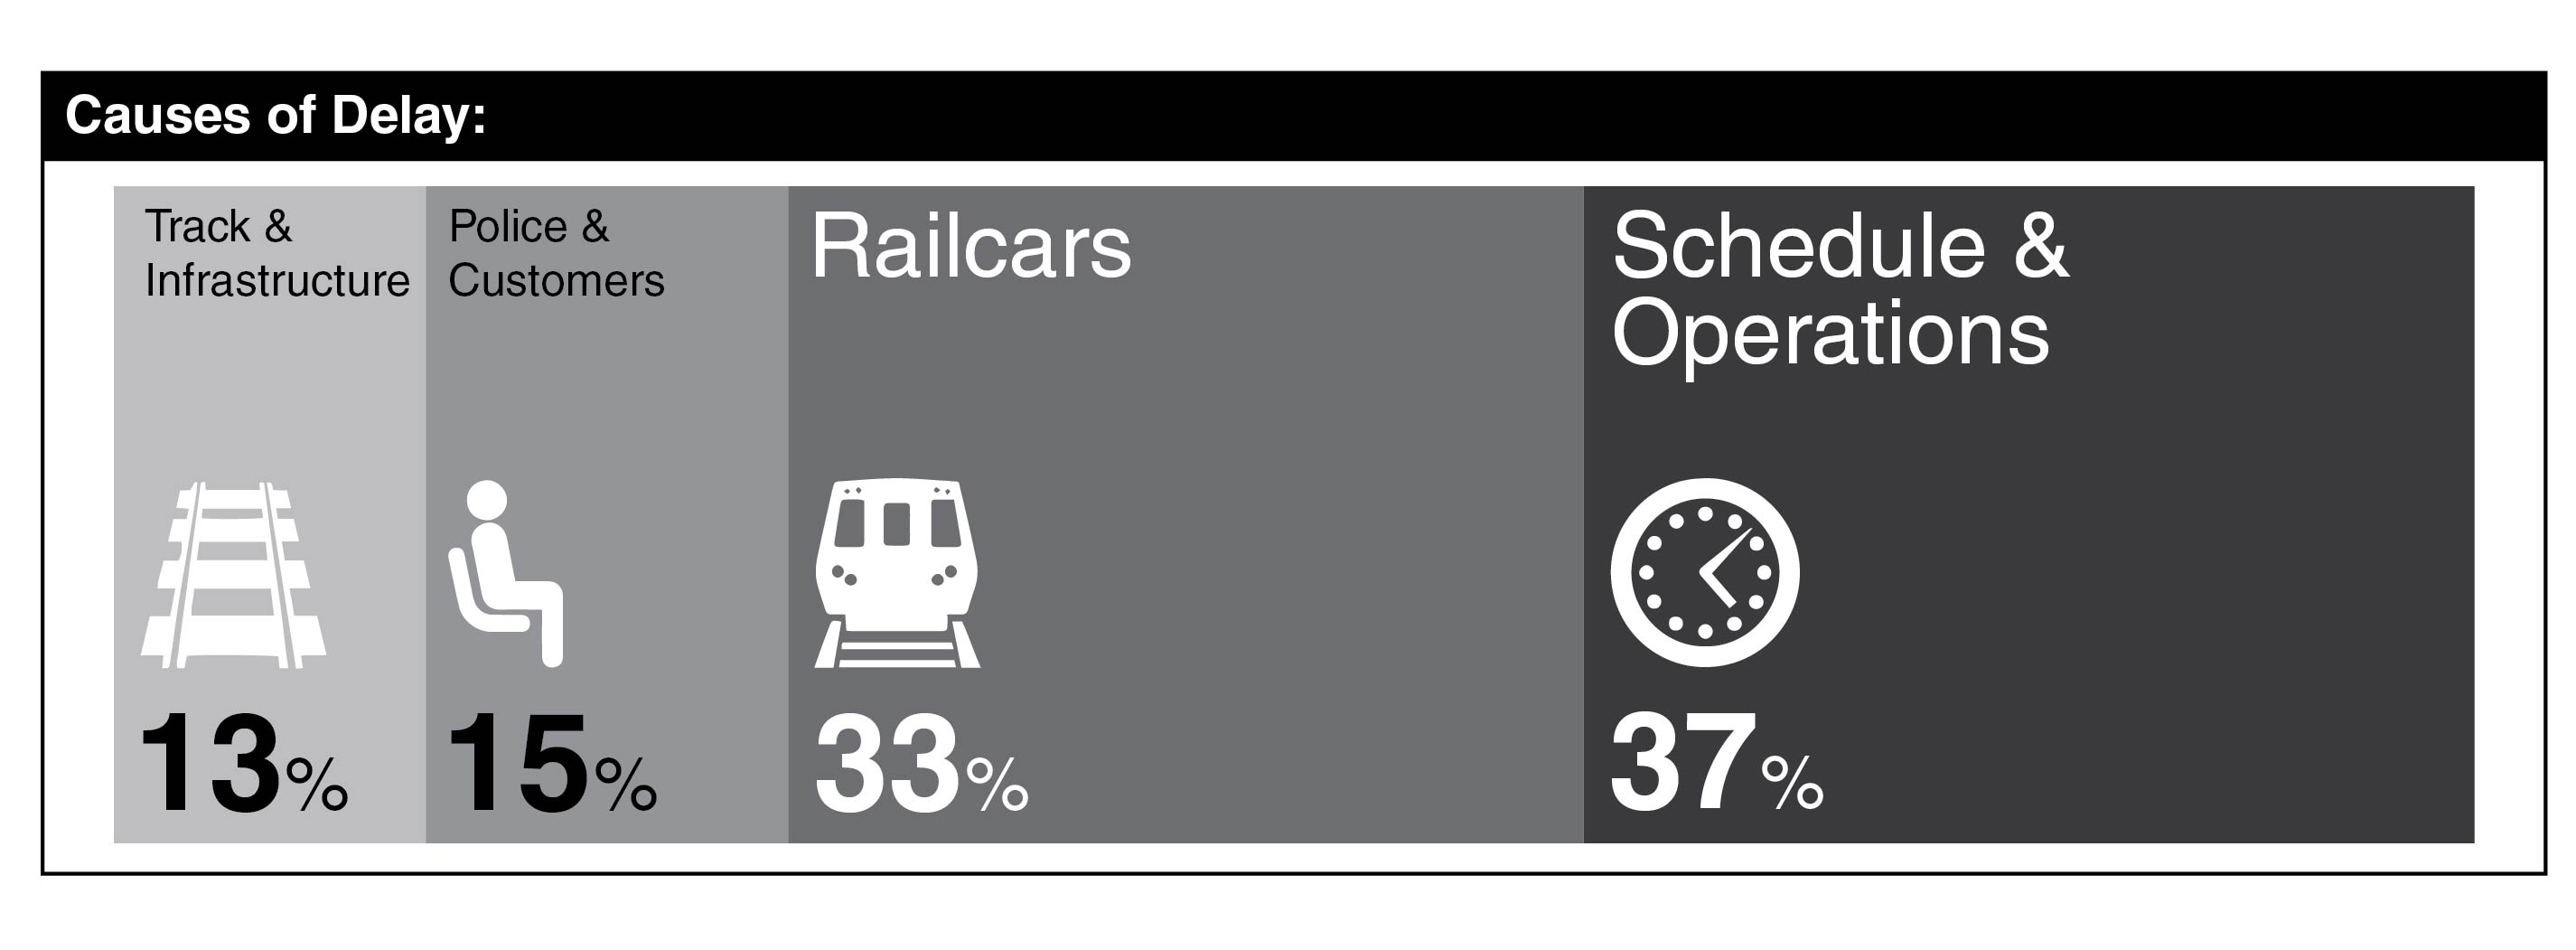 Graphic showing the average percentage breakdown for the causes of delay and disruption over one minute. Shows that only around half of delays are caused by mechanical issues with railcars and tracks. The other half are fire, police, and medical issues, customer behaviors, and/or unanticipated scheduling and operations adjustments. Those types of disruptions will always happen and Metro needs the ability to manage them more effectively.